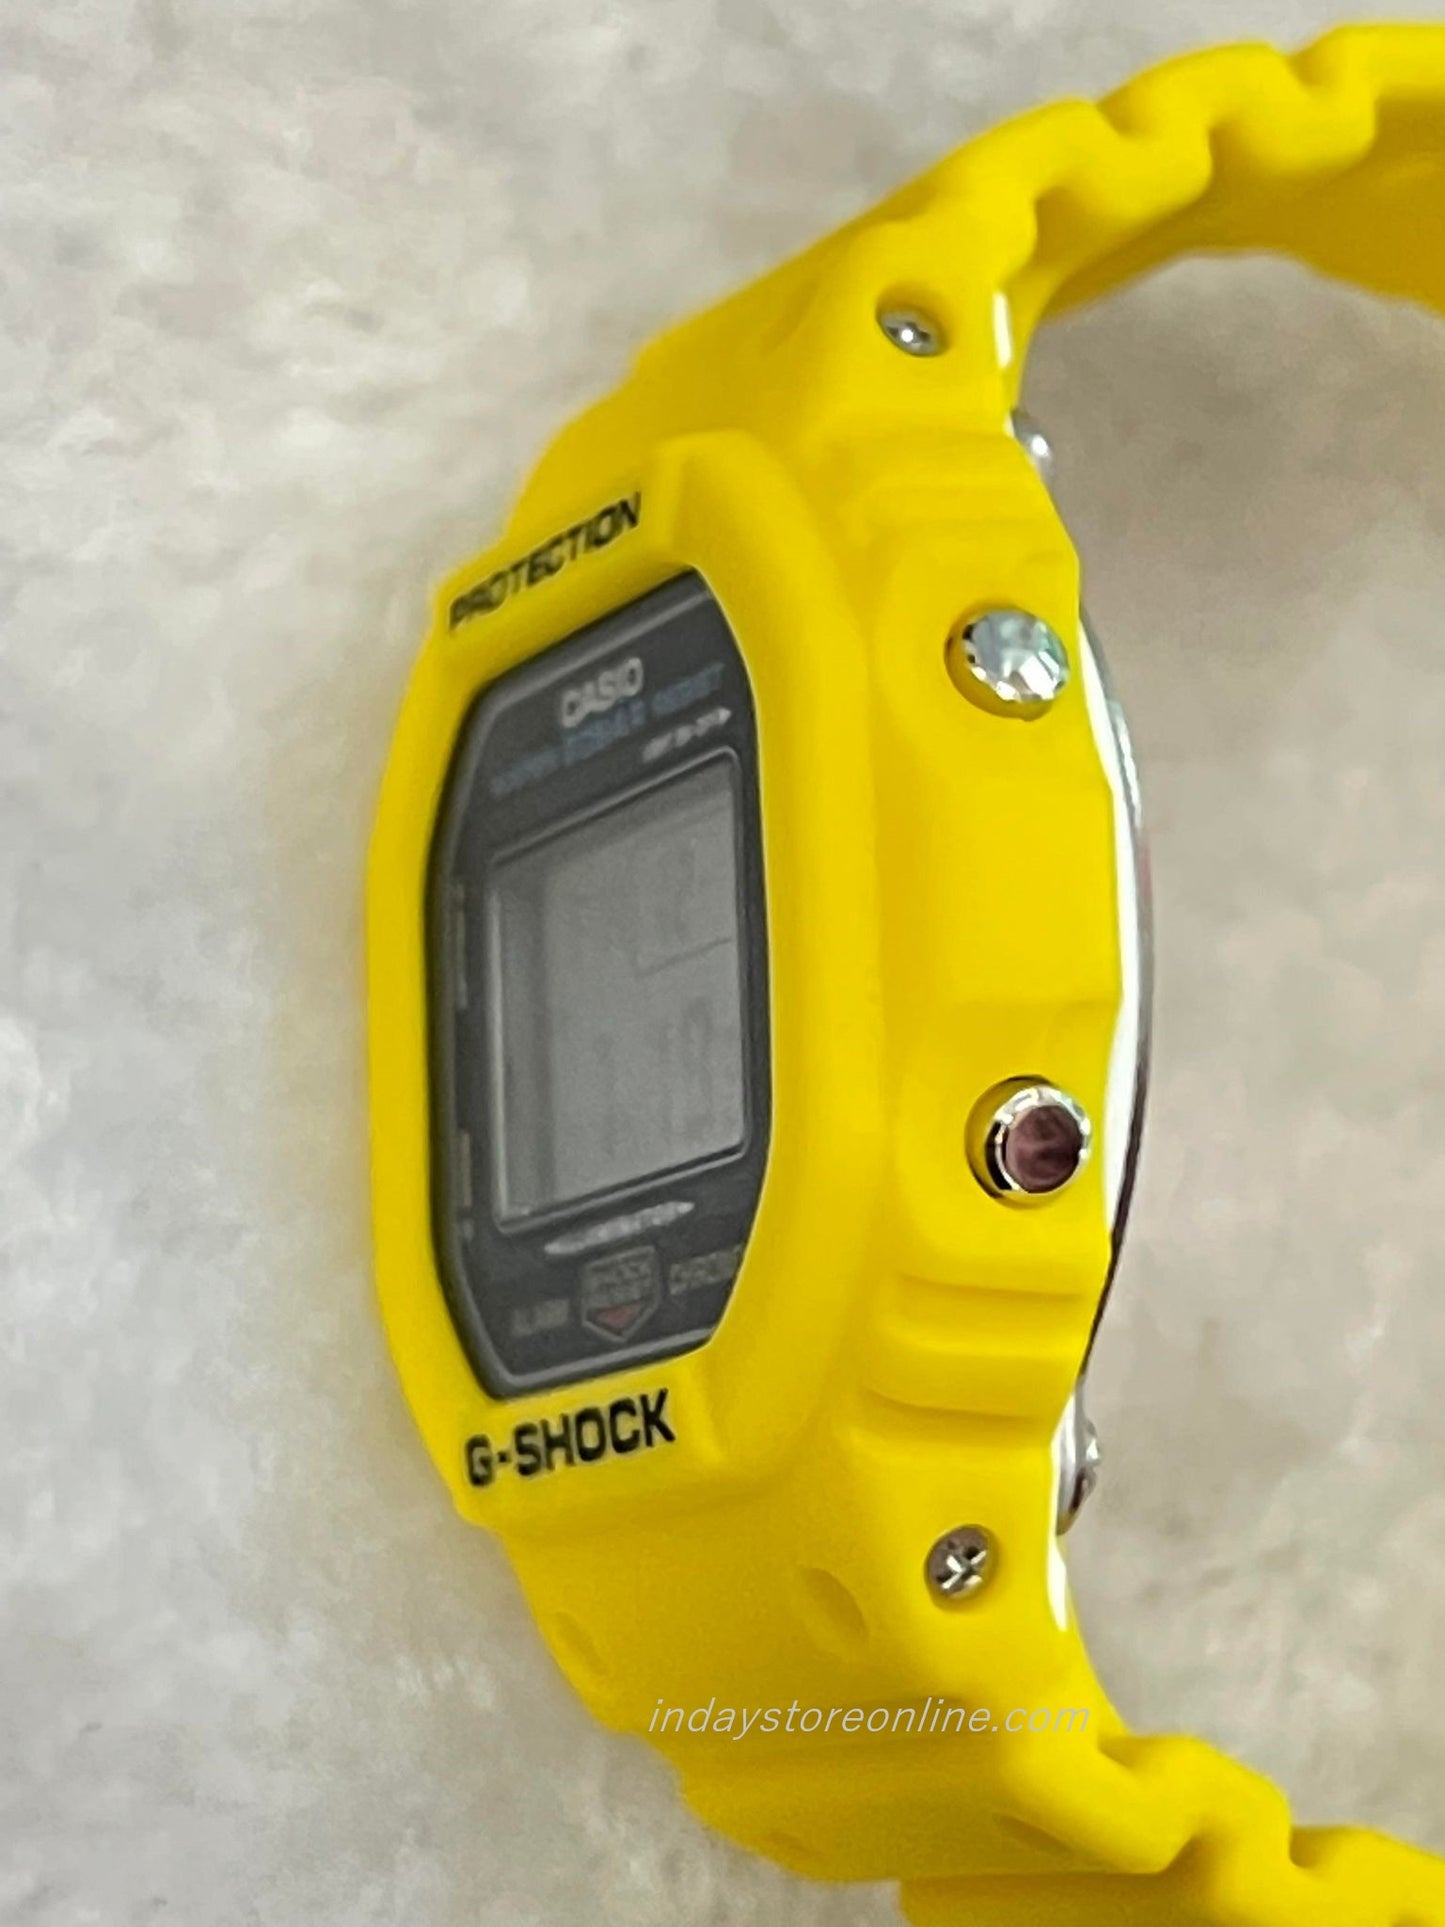 Casio G-Shock Men's Watch DW-5600REC-9 Digital 5600 Series Yellow Resin Band Electro-luminescent Backlight